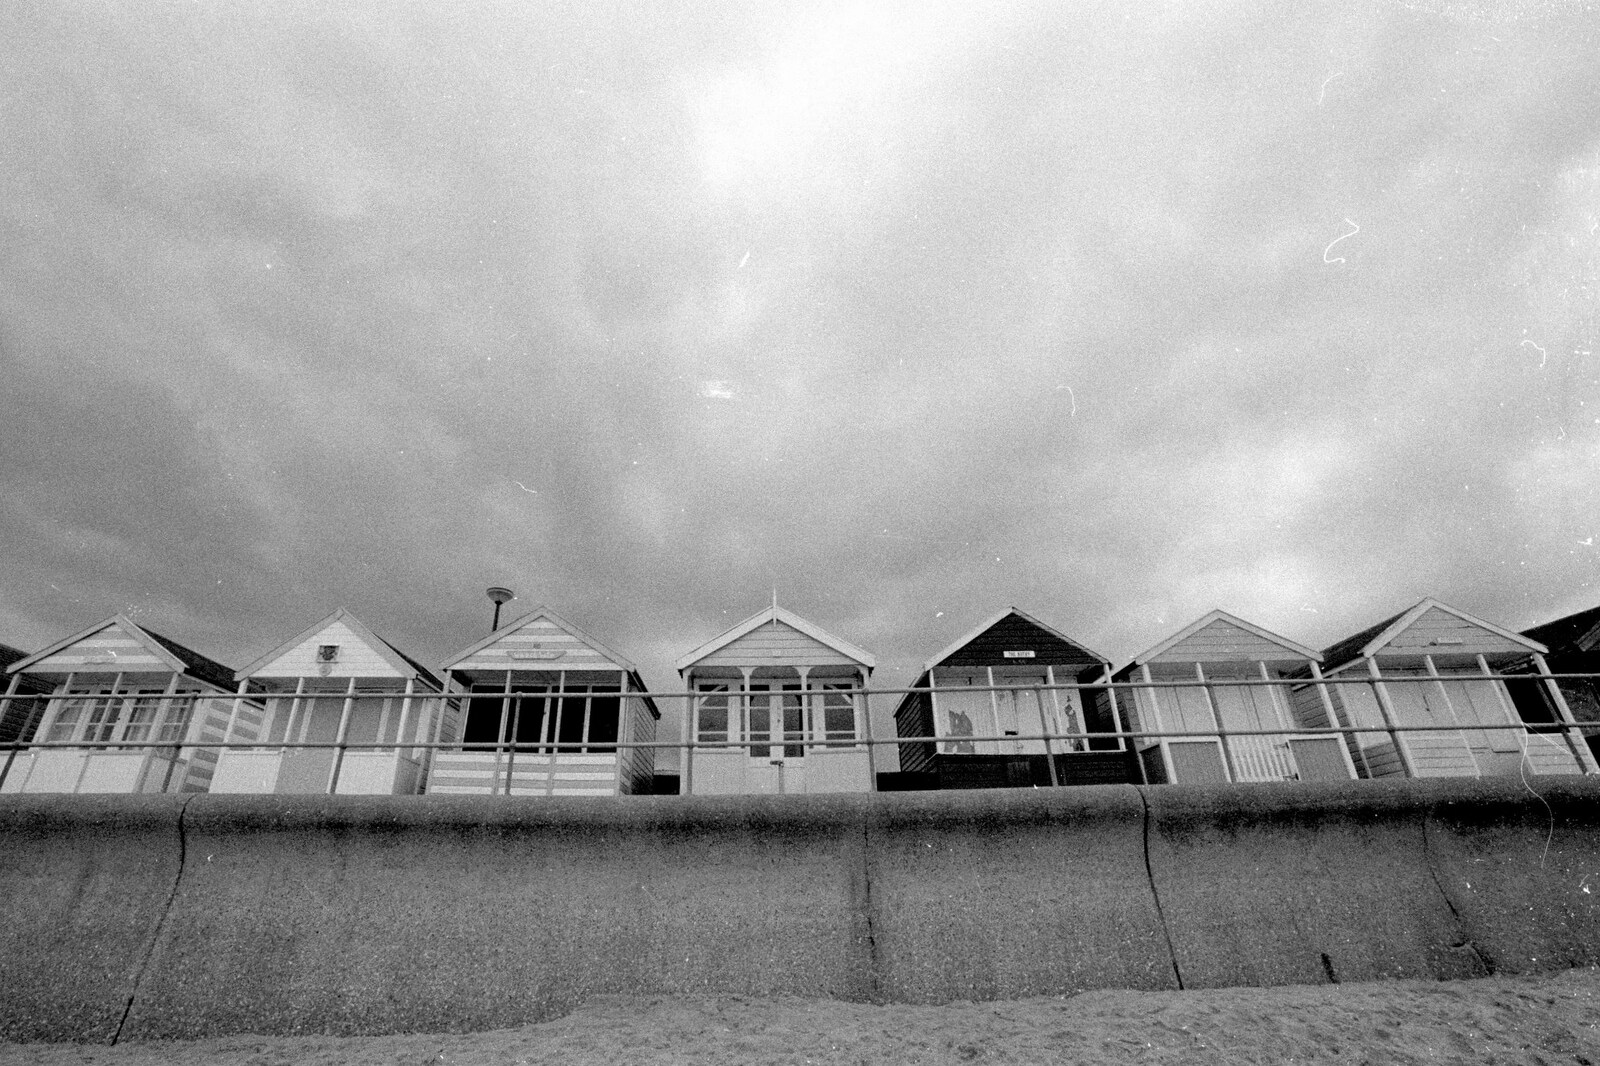 Beach huts on the promenade from A Night at the Crown Hotel, Southwold, Suffolk - 13th June 2012